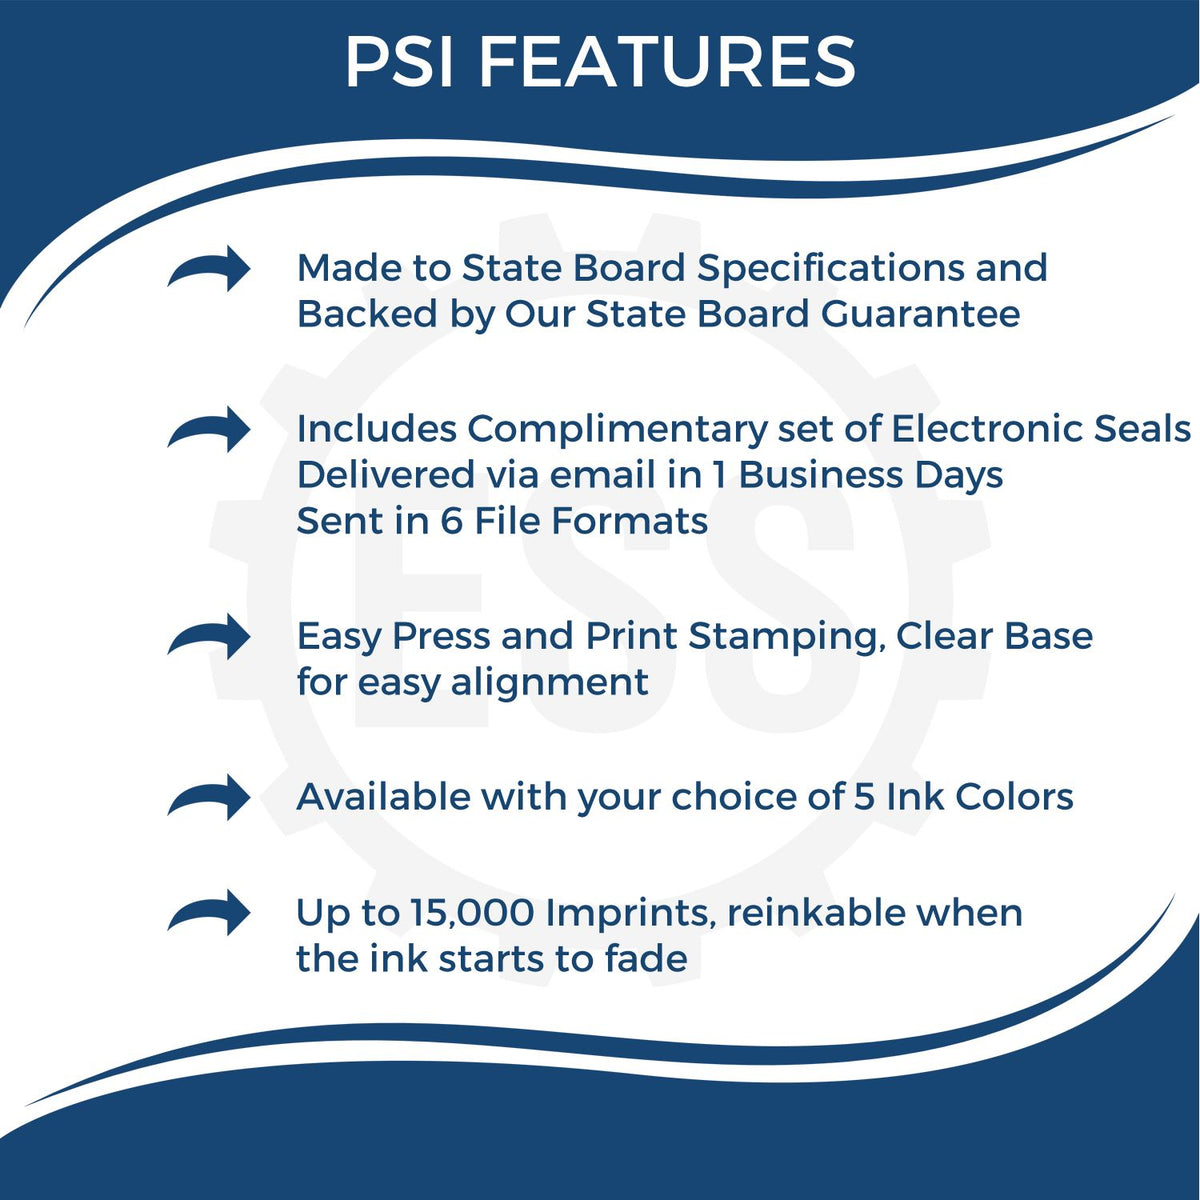 A picture of an infographic highlighting the selling points for the PSI Missouri Notary Stamp